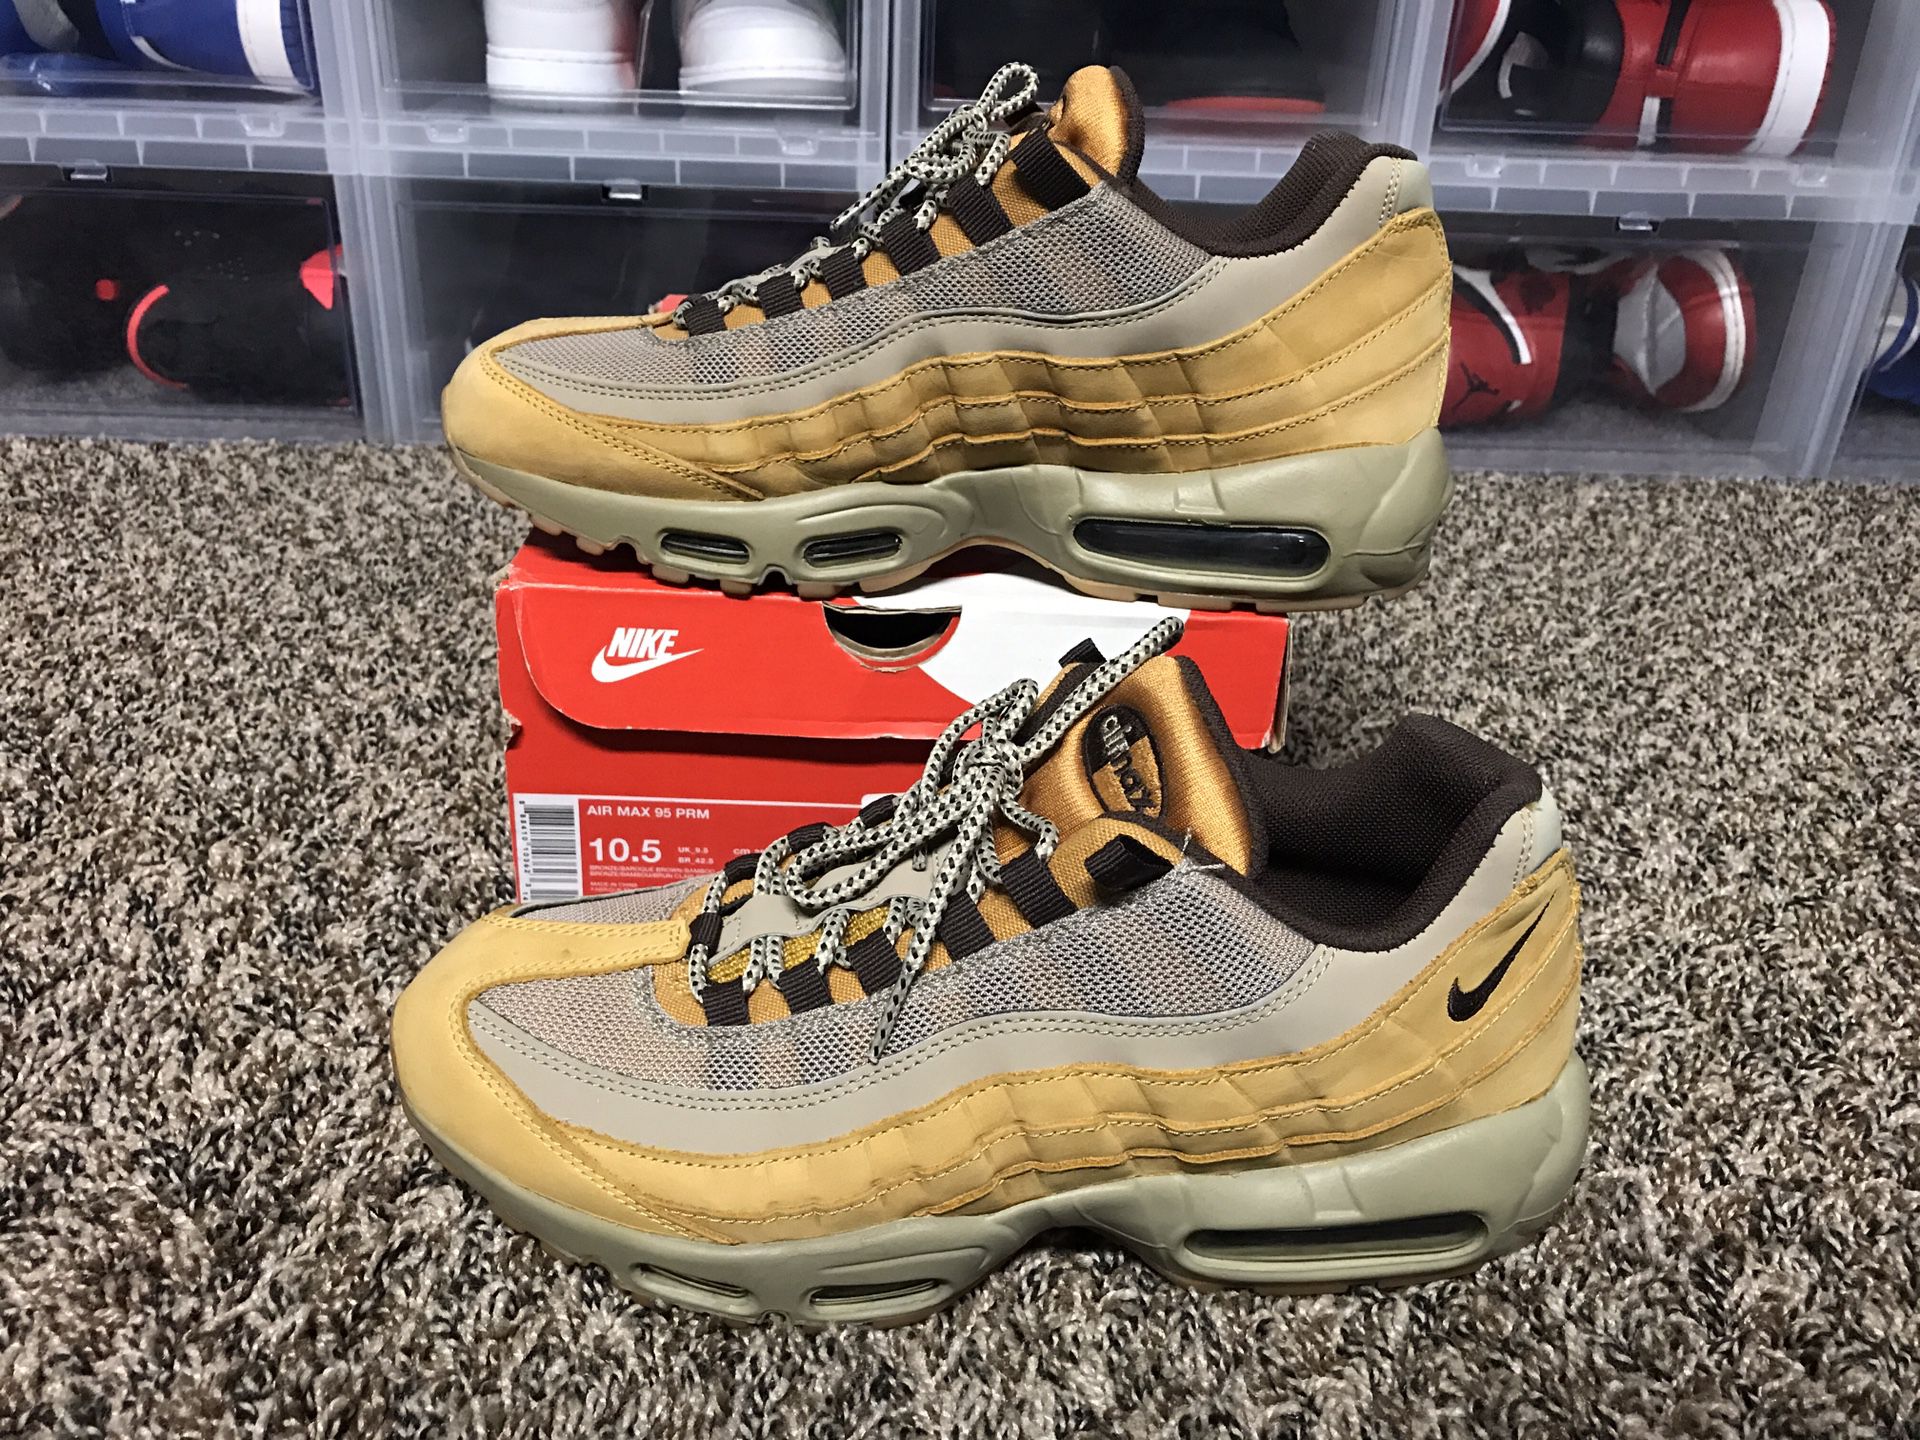 Air Max 95 Premium Wheat Size 10.5 Excellent Condition Used